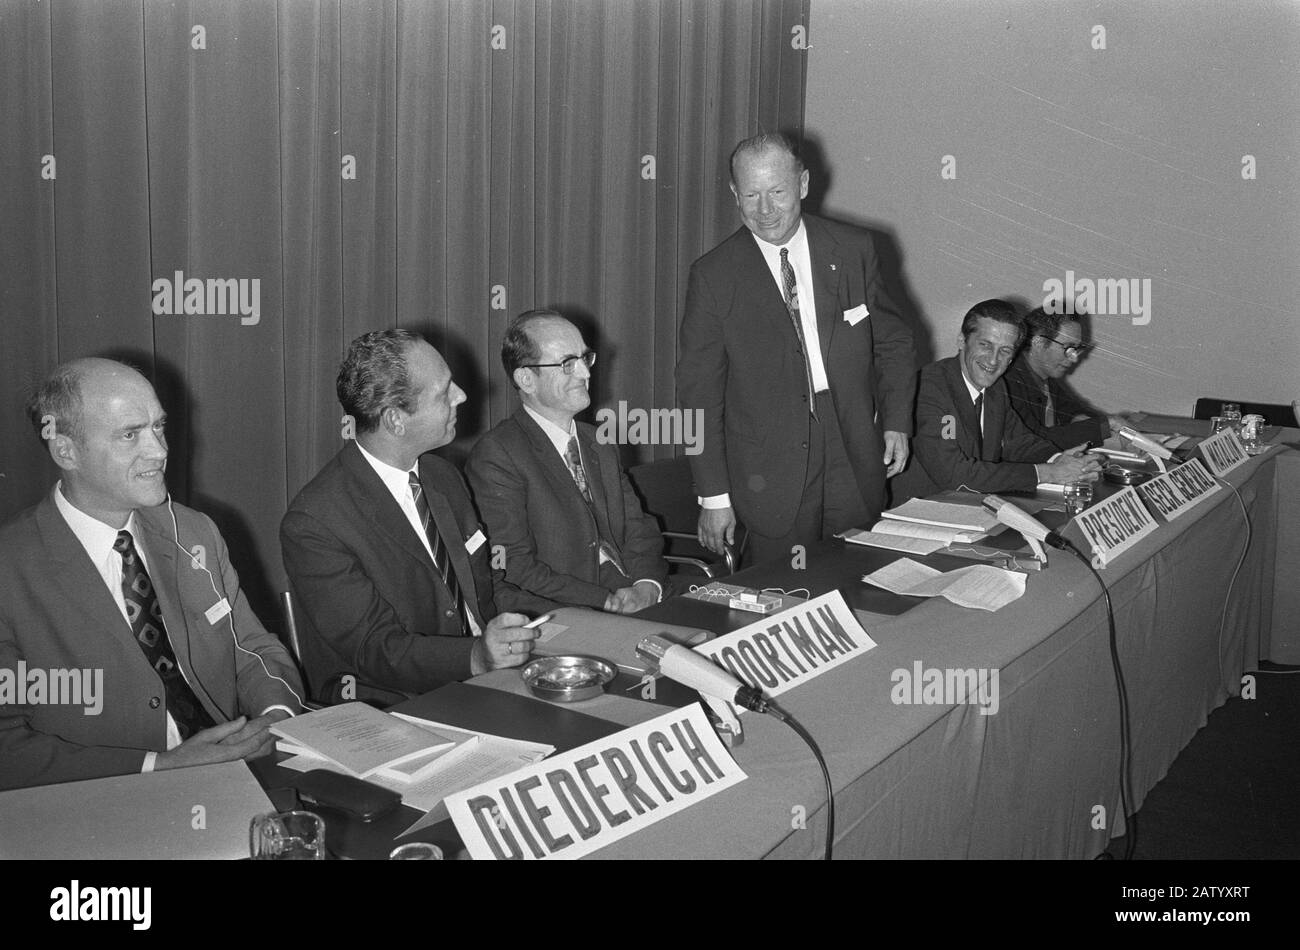 Minister Drees (Transport) Scientific Symposium opens in Congress, Den Haag, v.l.n.r. Diederich, Noortman, Drees, Ridley, Vrebos, Date: October 5, 1971 Location: The Hague, South Holland Keywords: openings Institution Name: Congress Stock Photo